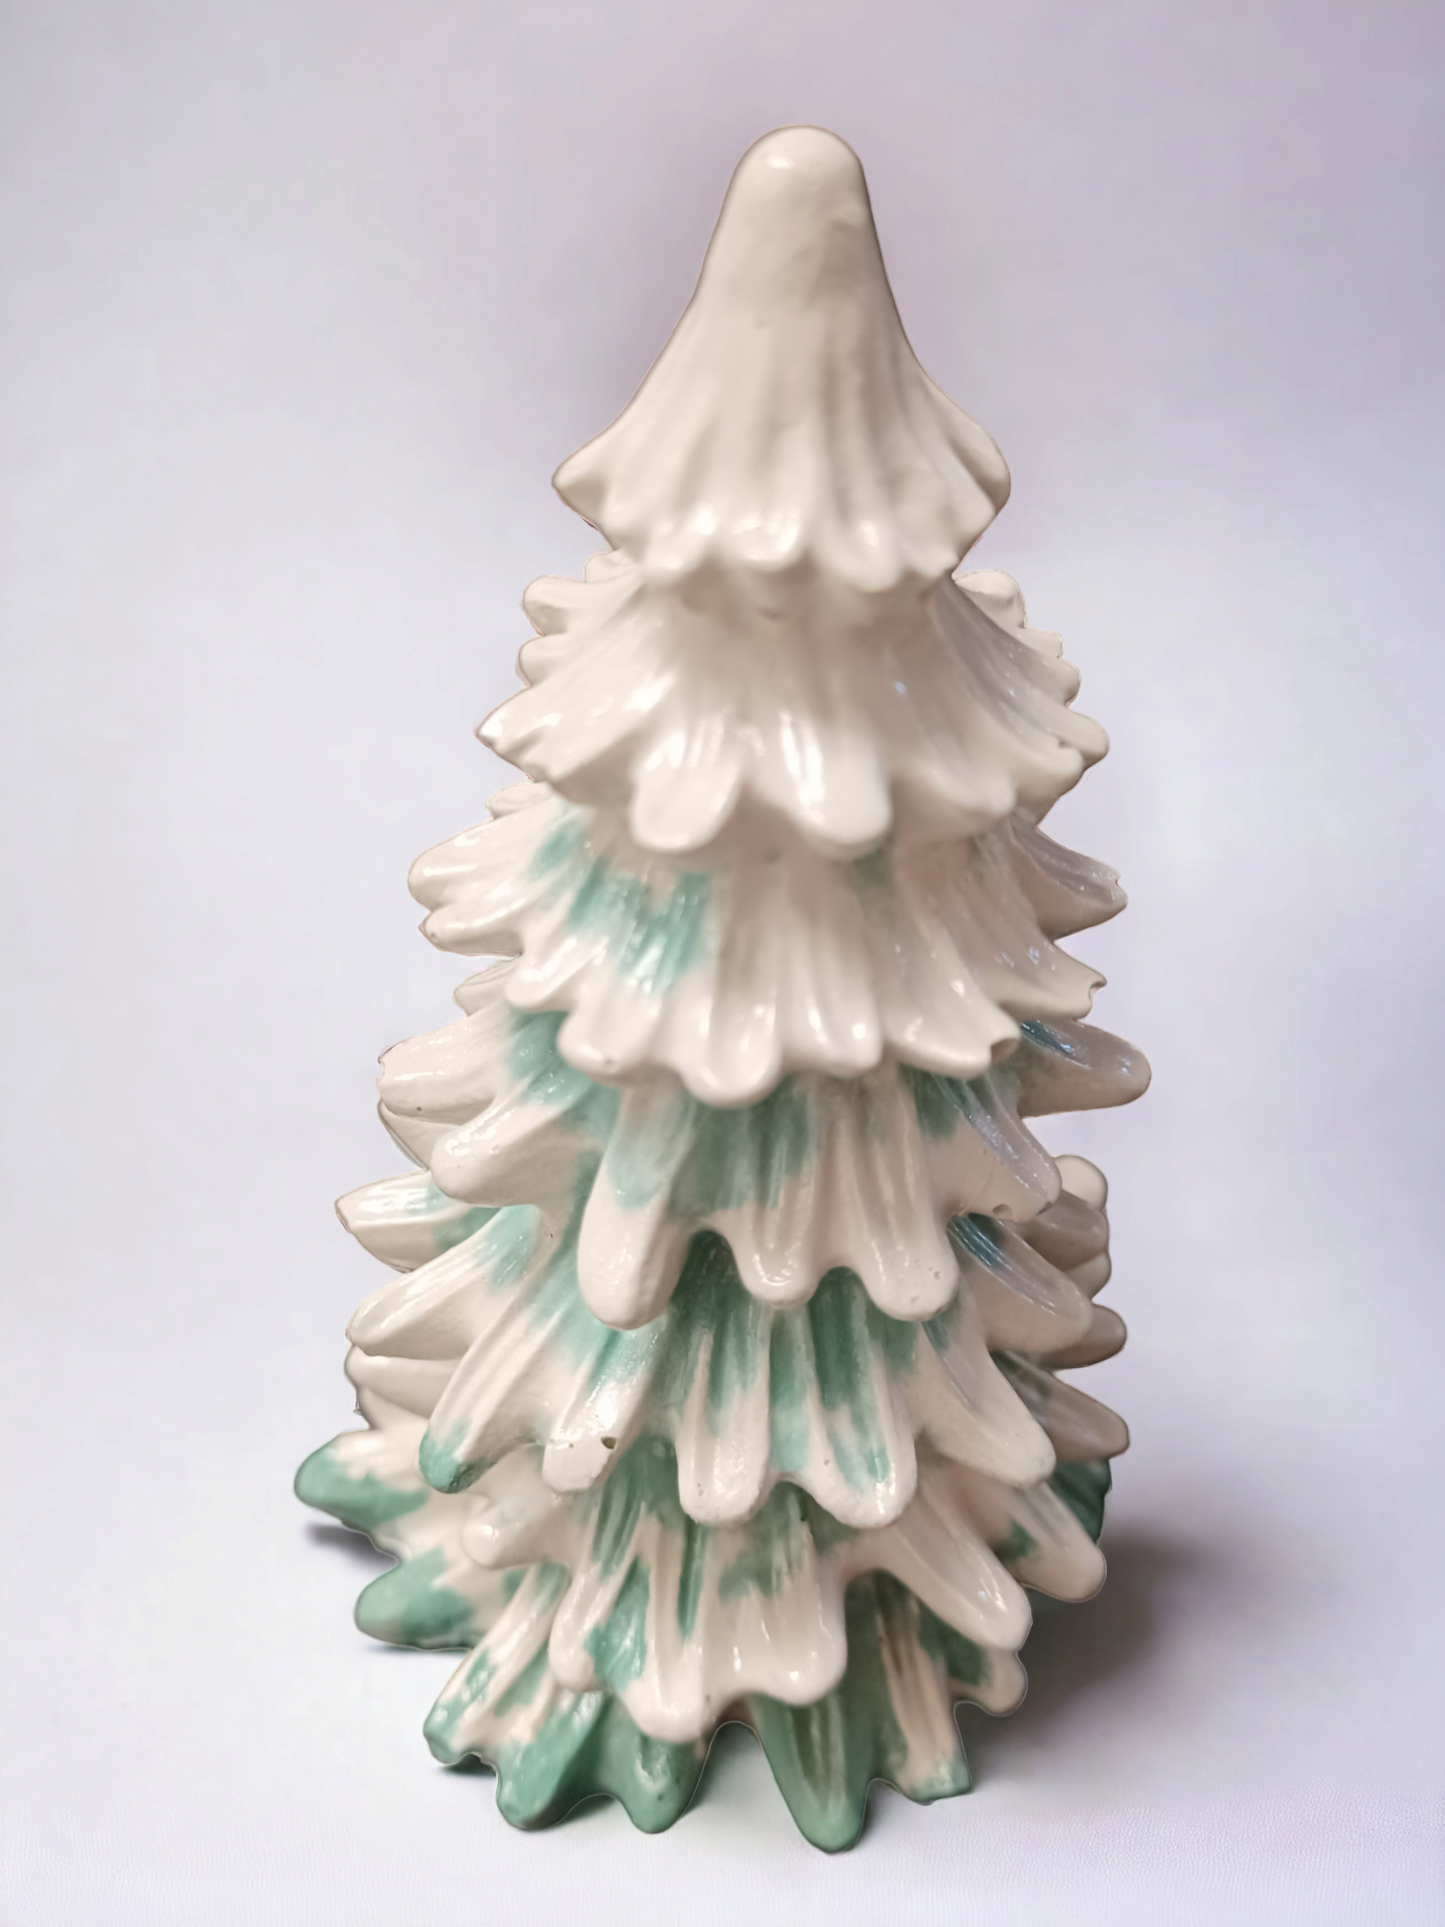 The "Holiday Pine" Handmade, Cement, Rustic Decorative Holiday Tree (Type A)